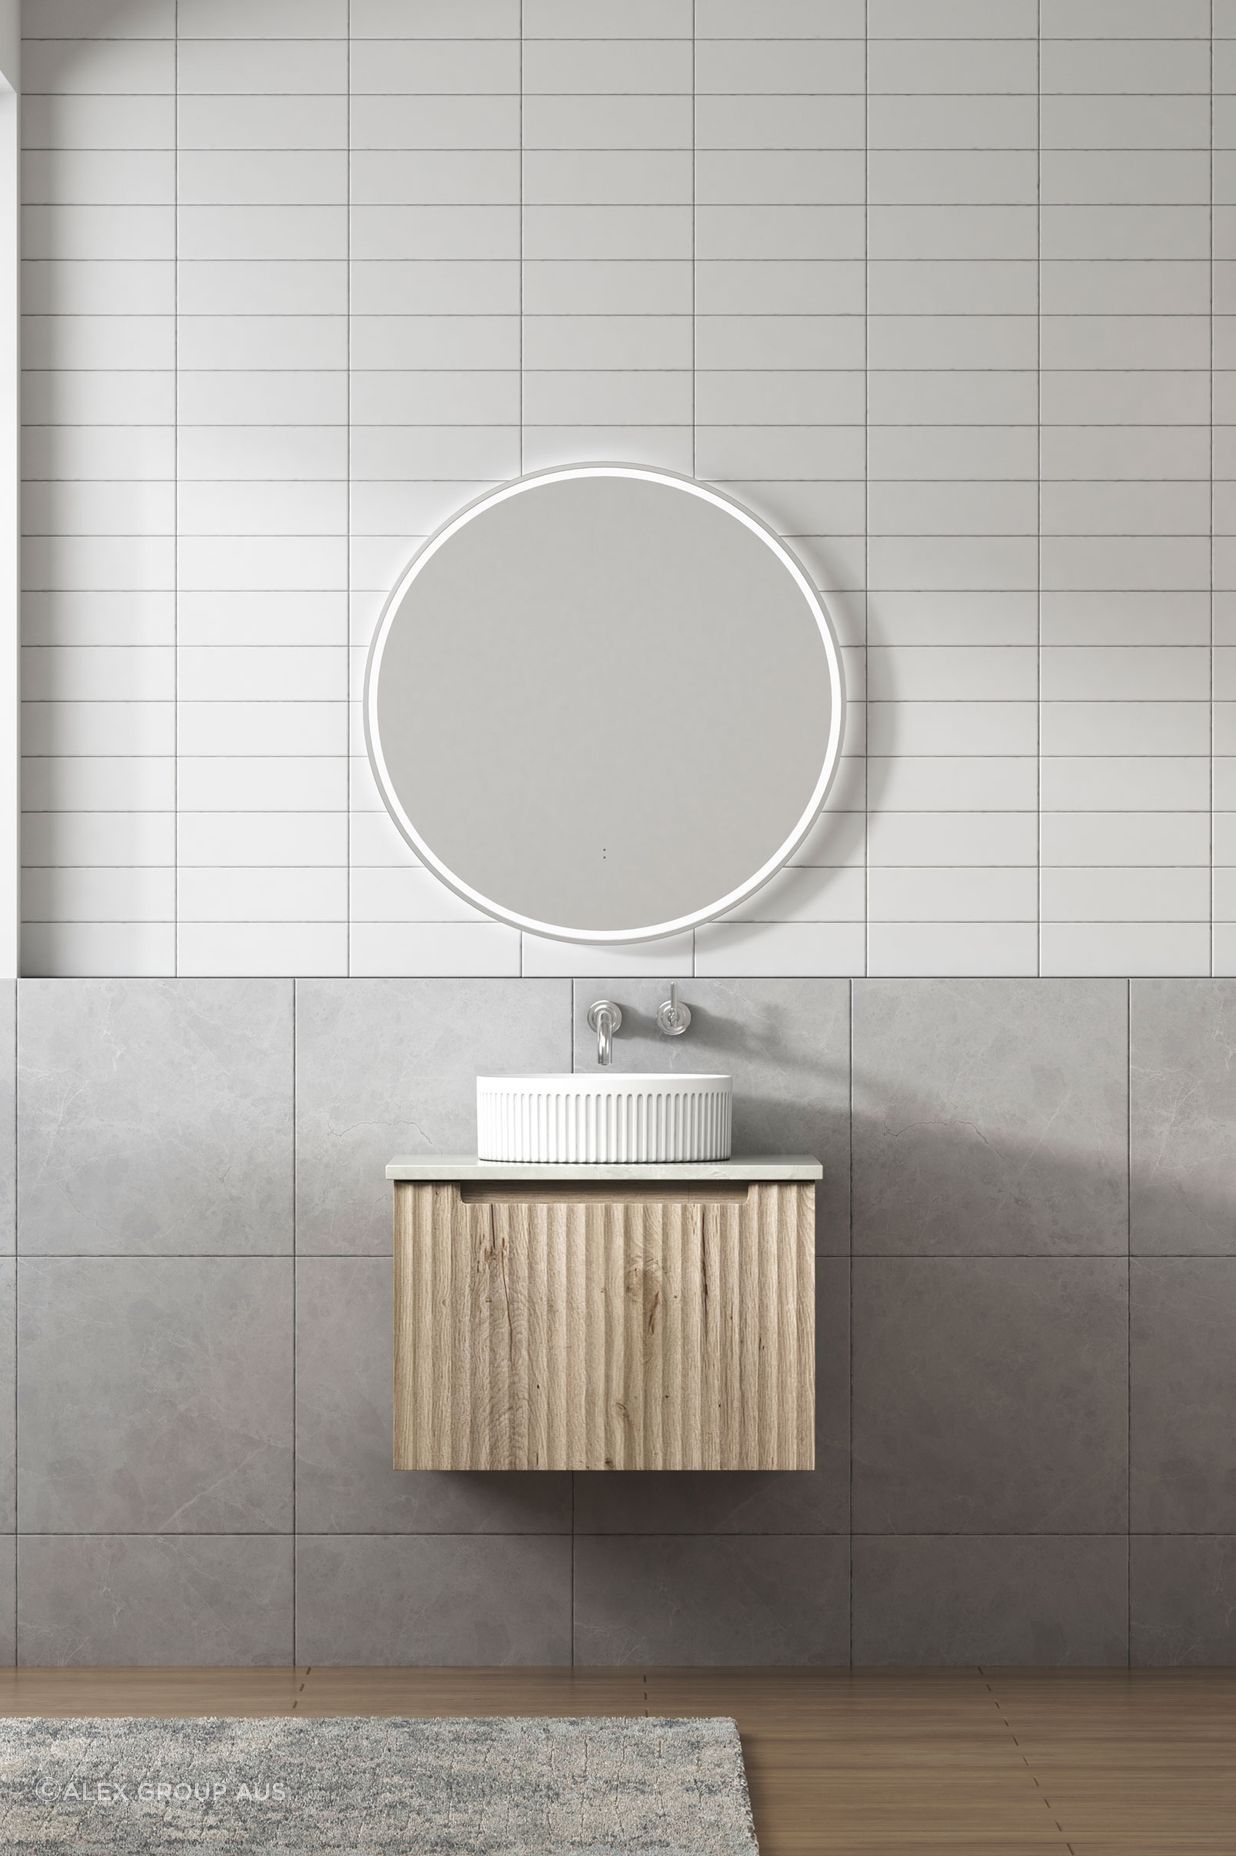 A single vanity is perfect for a limited space